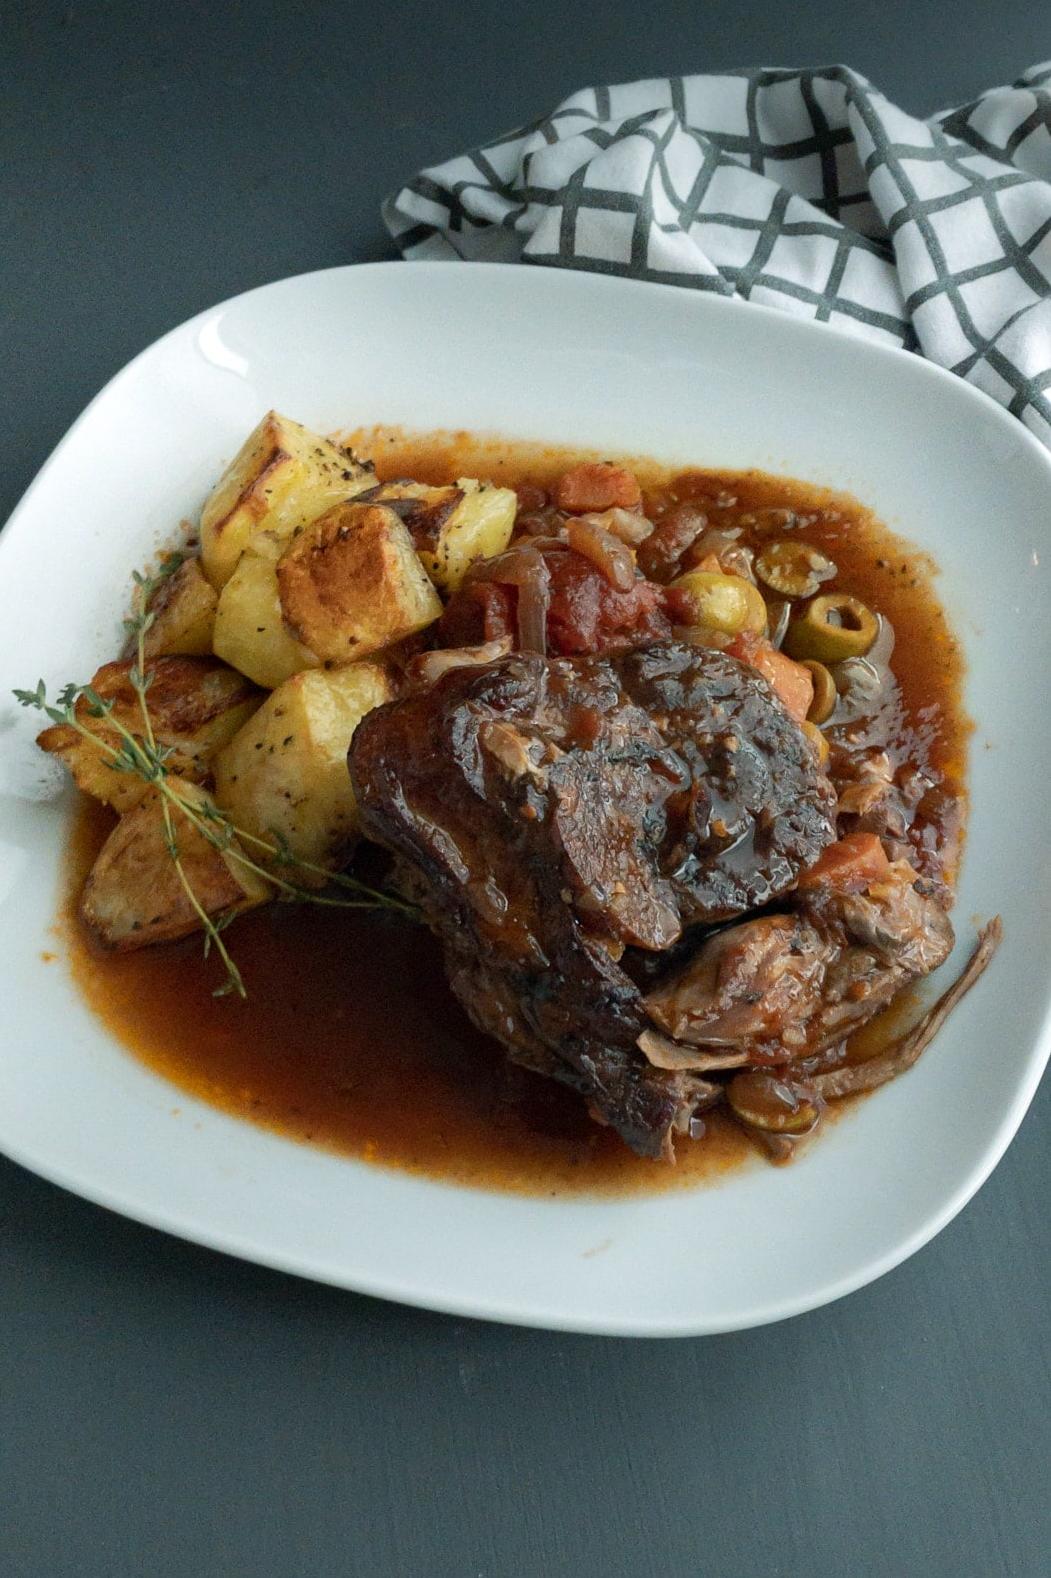  Impress your guests with this perfectly roasted lamb.